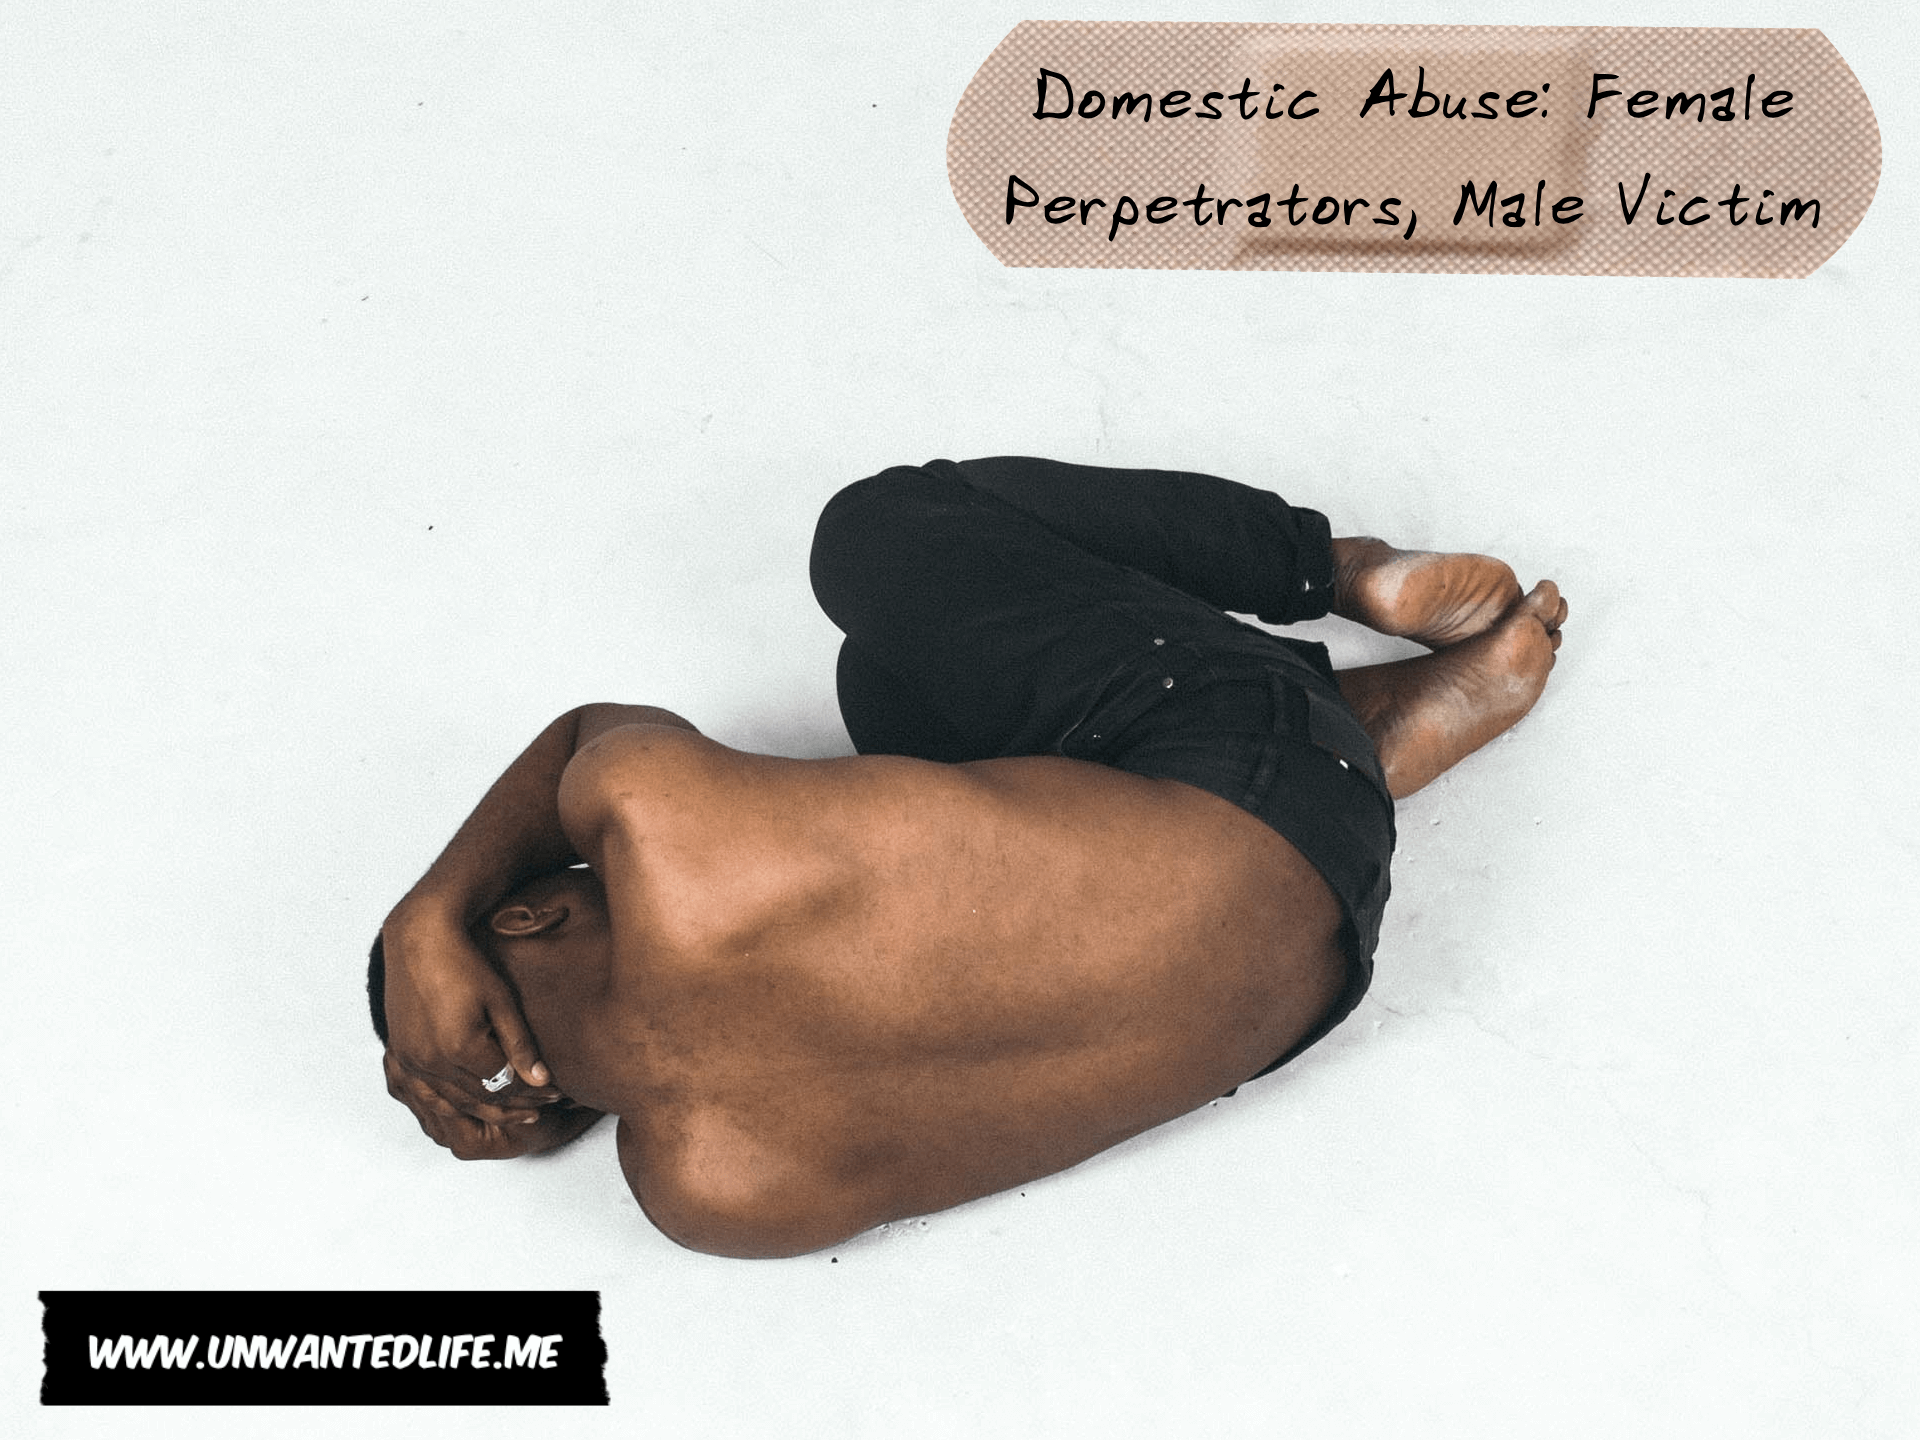 Photo of a topless black man laying on the floor covering himself as if to protect himself on a cold white floor with the title of the article - Domestic Abuse Female Perpetrators, Male Victim - in the top right corner of the image